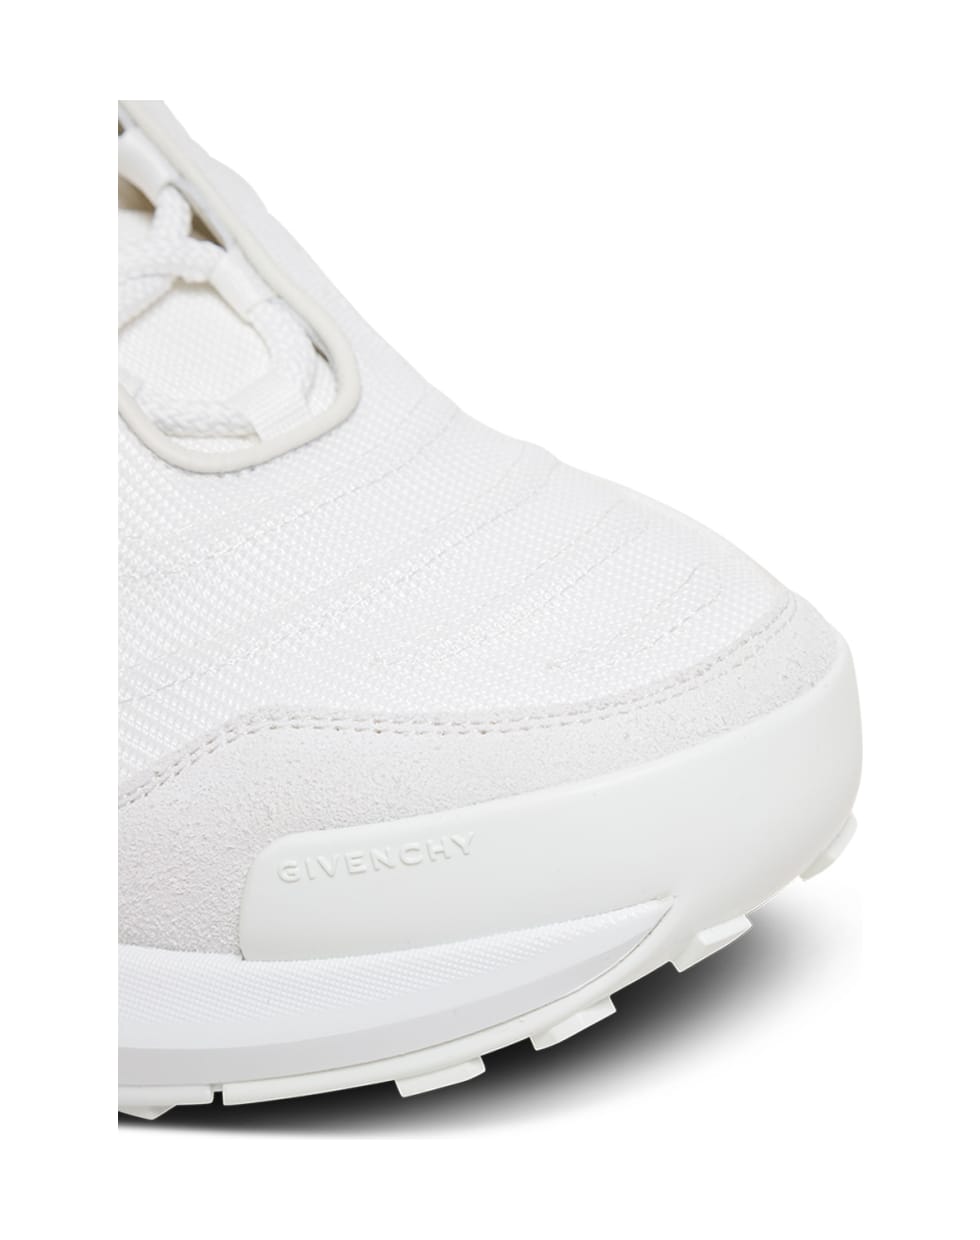 Givenchy Giv 1 Light Sneakers In Canvas And Leather - White